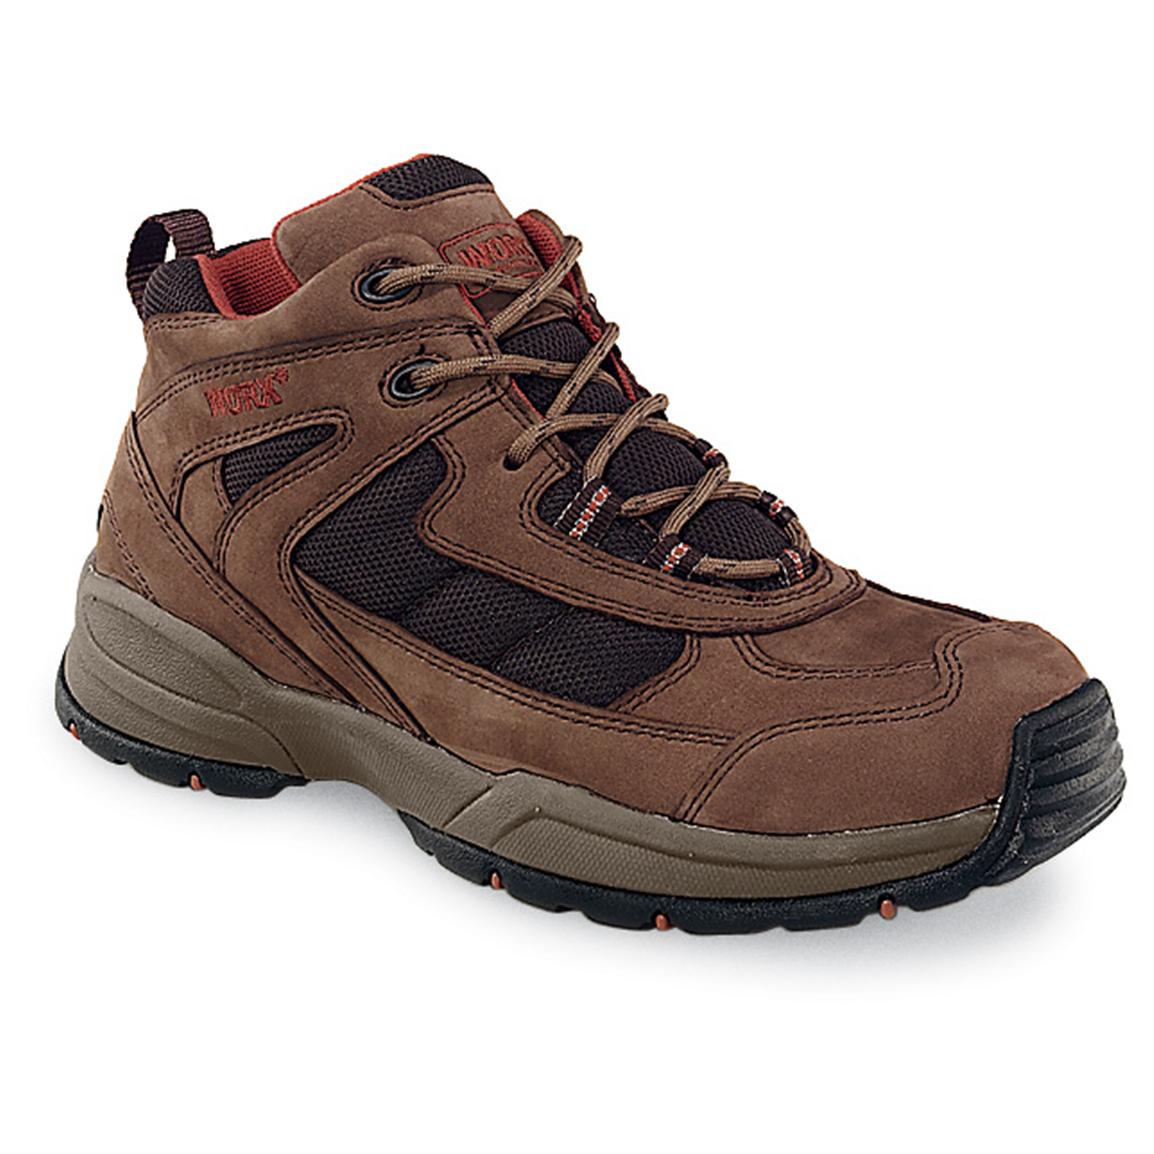 Women's Worx® Steel Toe Boots - 148311, Work Boots at Sportsman's Guide